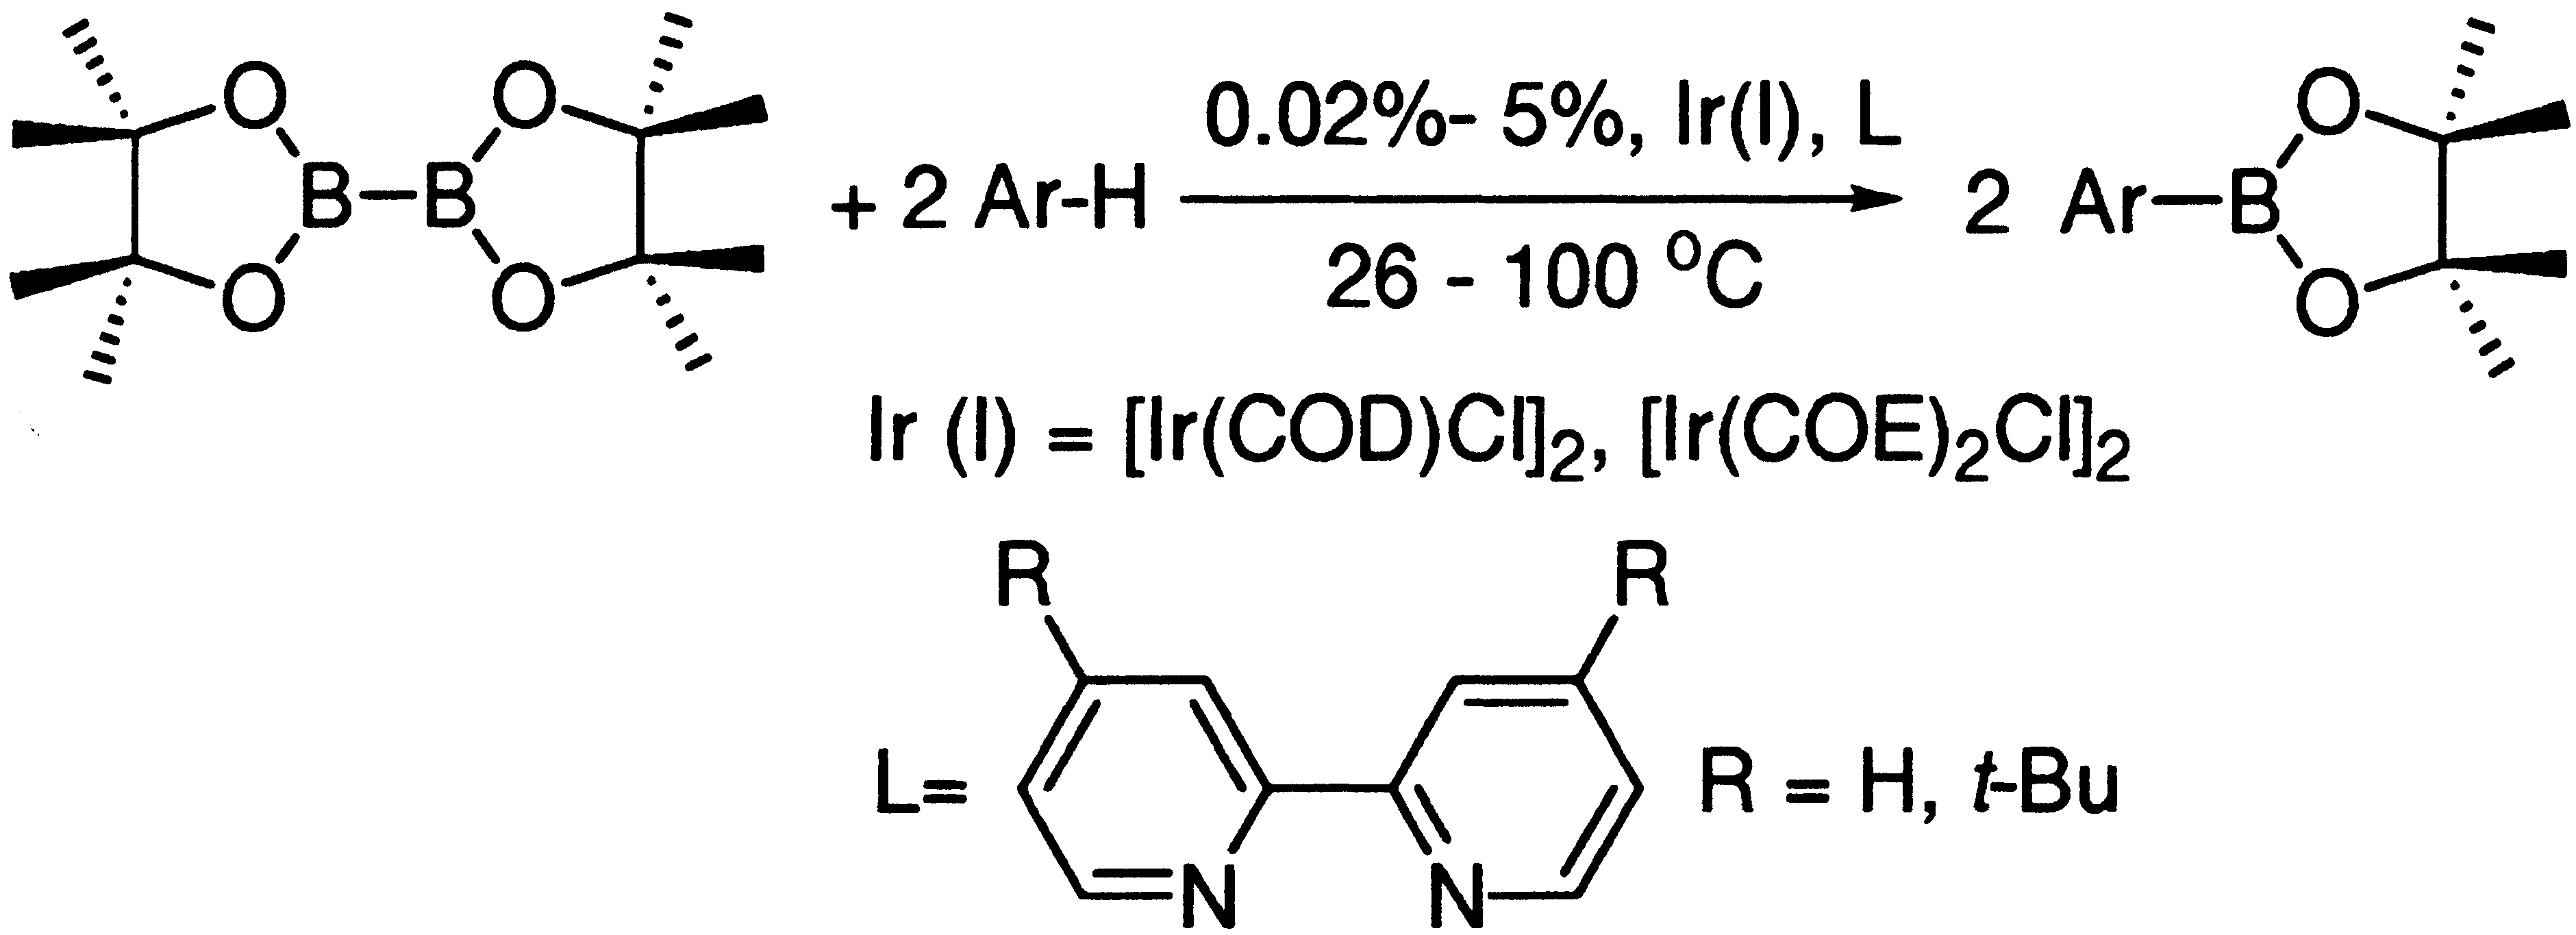 Mild iridium-catalyzed borylation of arenes. High turnover numbers,   	room temperature reactions, and isolation of a potential intermediate